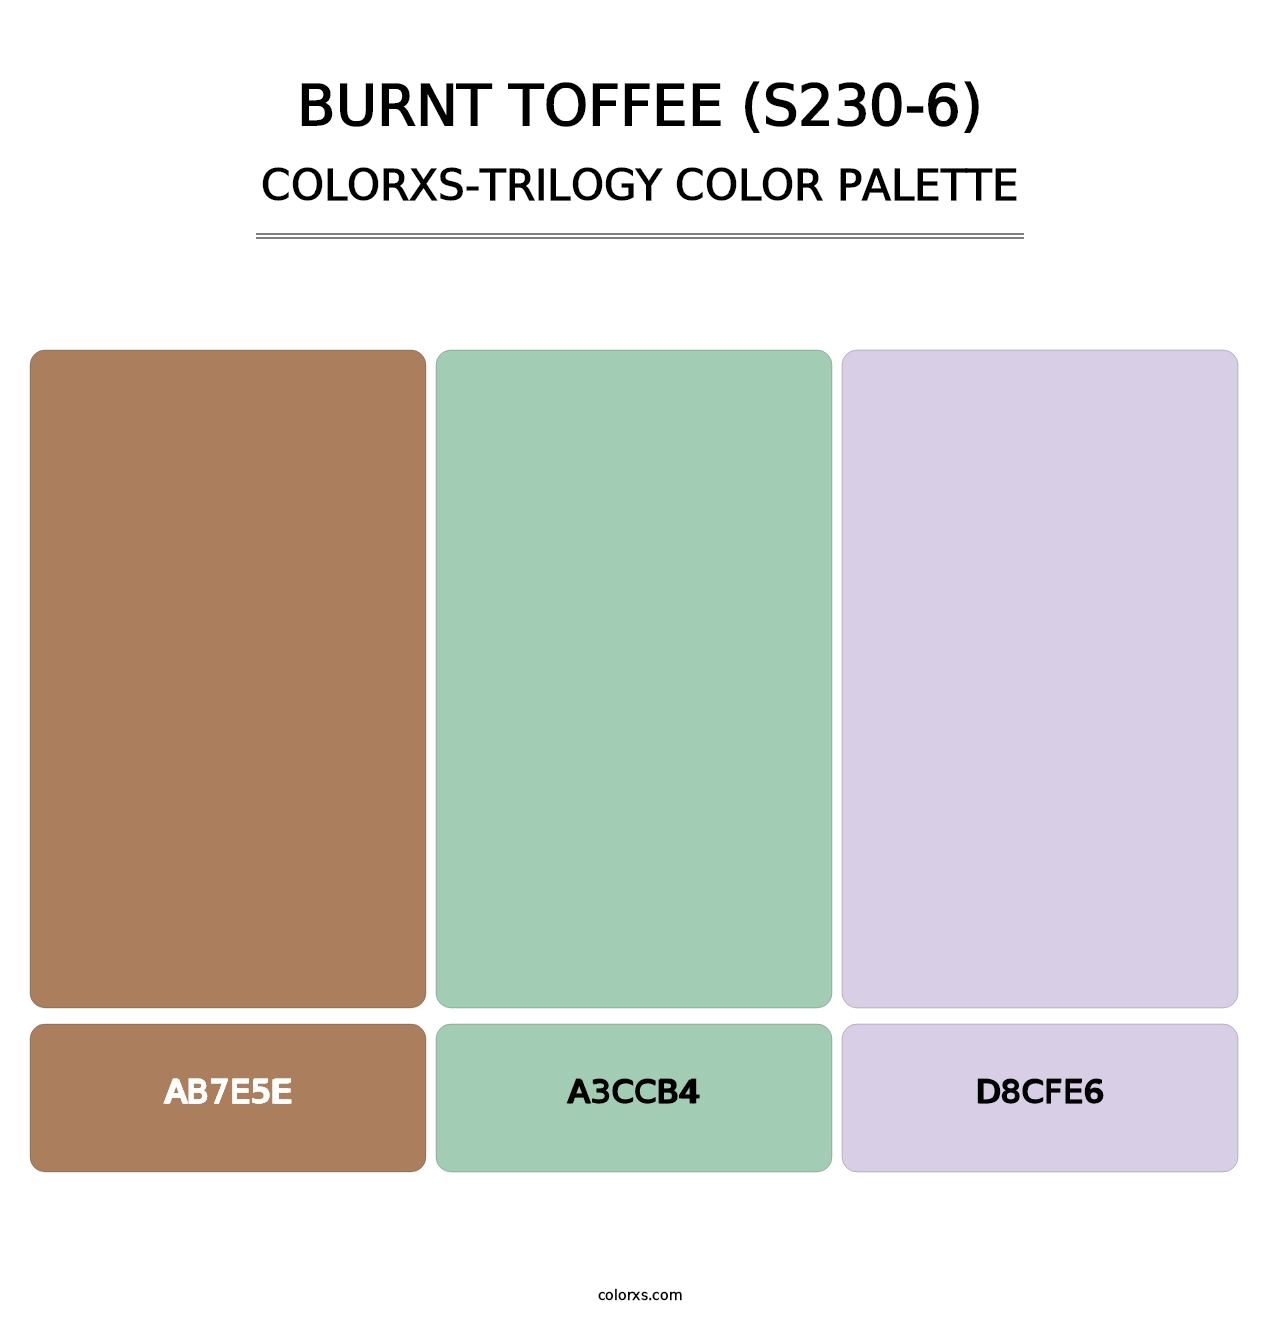 Burnt Toffee (S230-6) - Colorxs Trilogy Palette